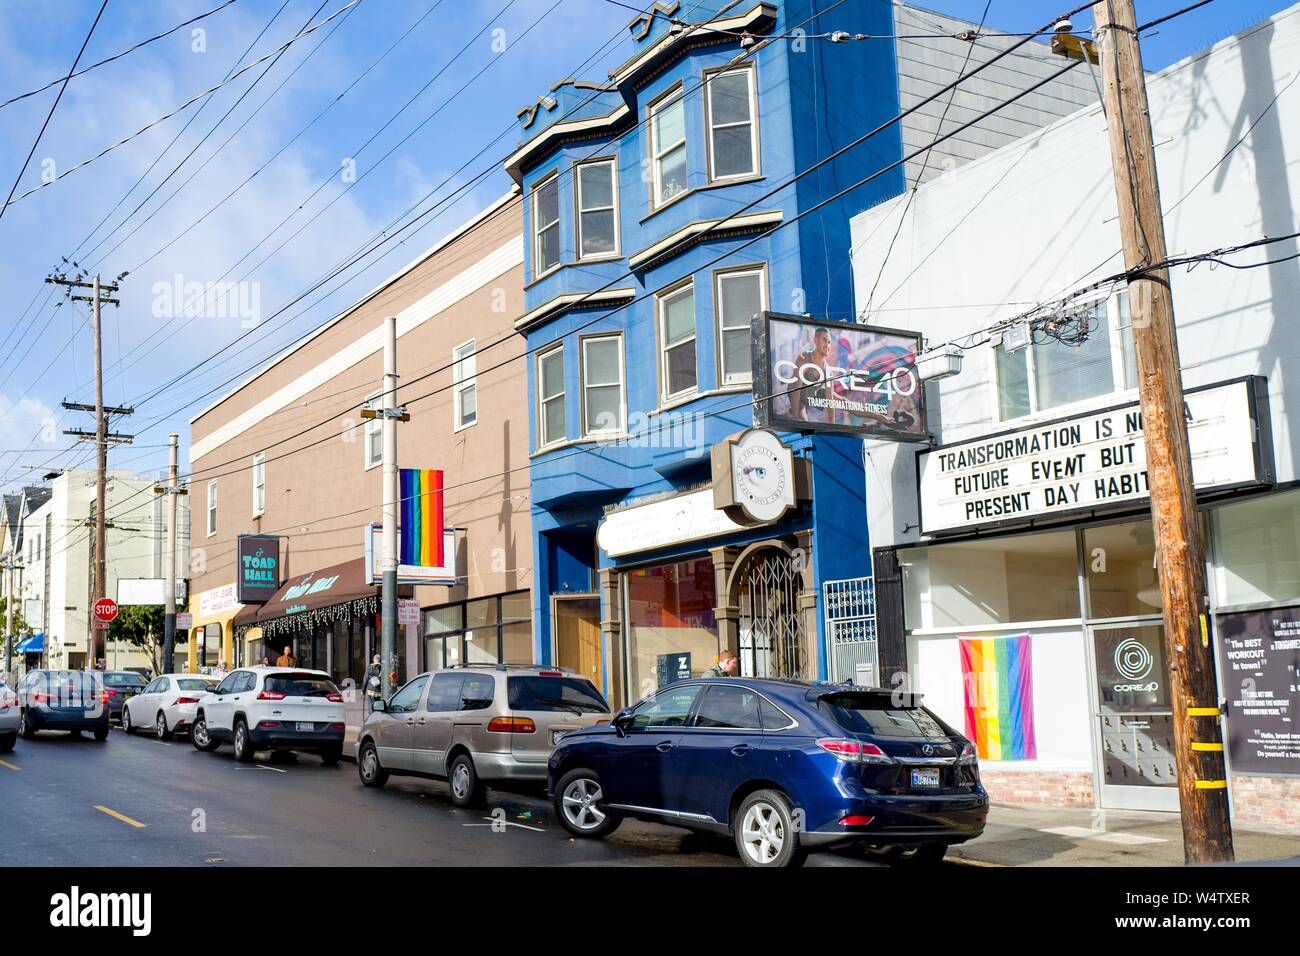 Numerous LGBT rainbow pride flags are visible on a sunny day on 18th street in the Castro District of San Francisco, California, known as one of the major centers of LGBT culture in the United States, December, 2018. () Stock Photo